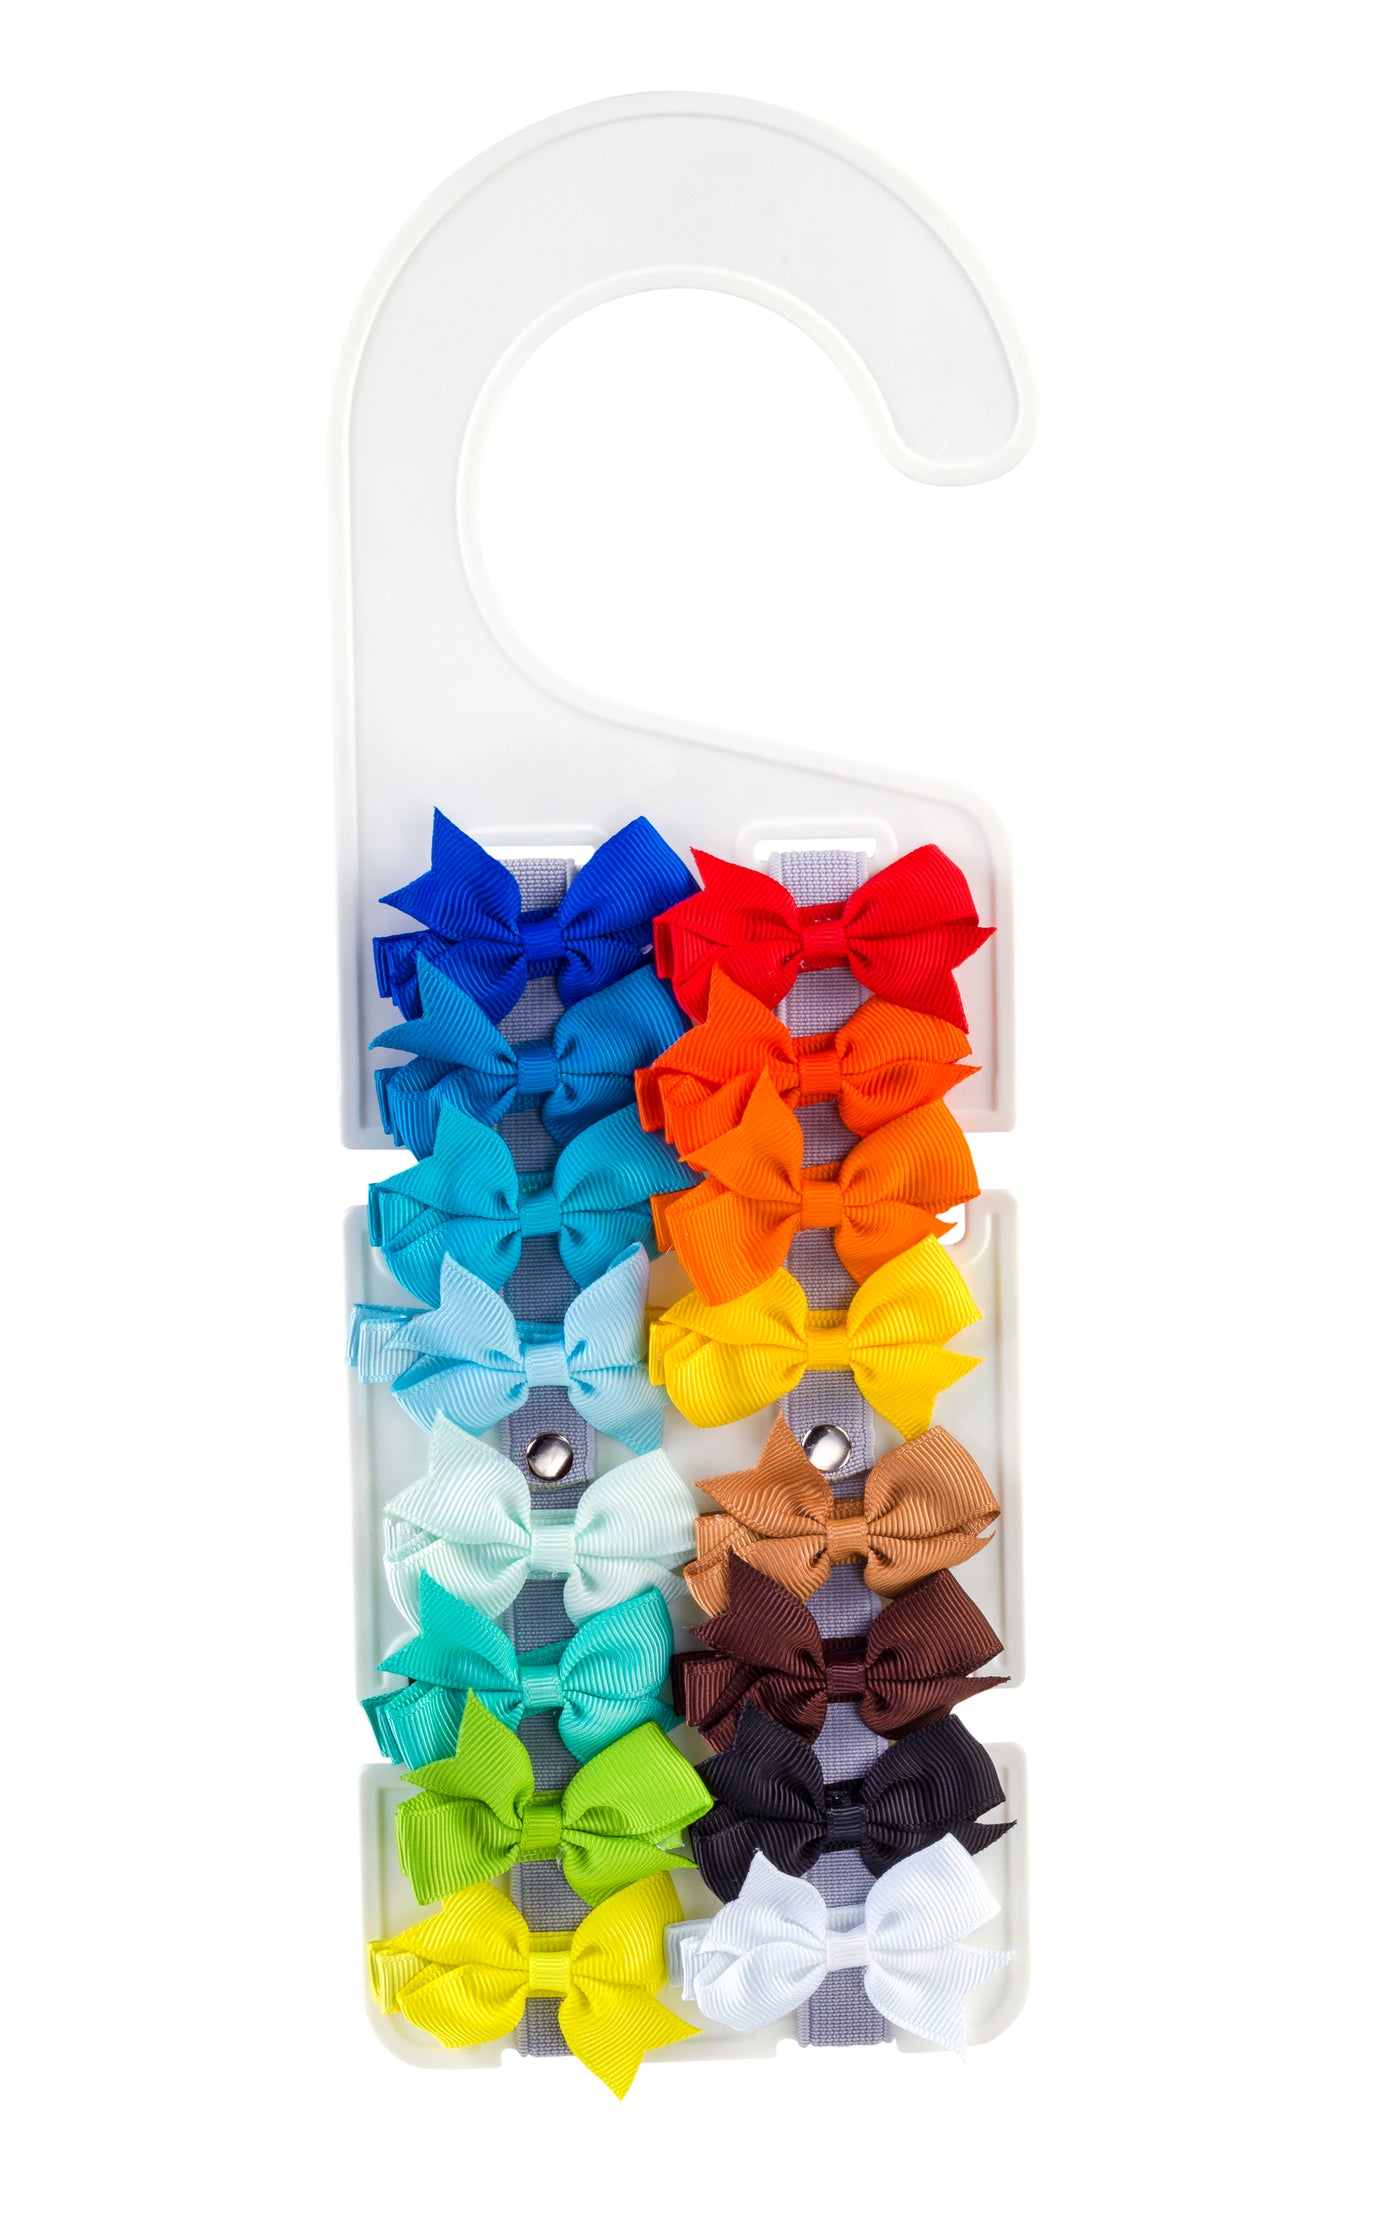 Classic Klipster Hair Accessories Organizers are double-sided, lightweight, compact, and portable. They hold hair clips, hair bows, scrunchies, hair ties, and more.